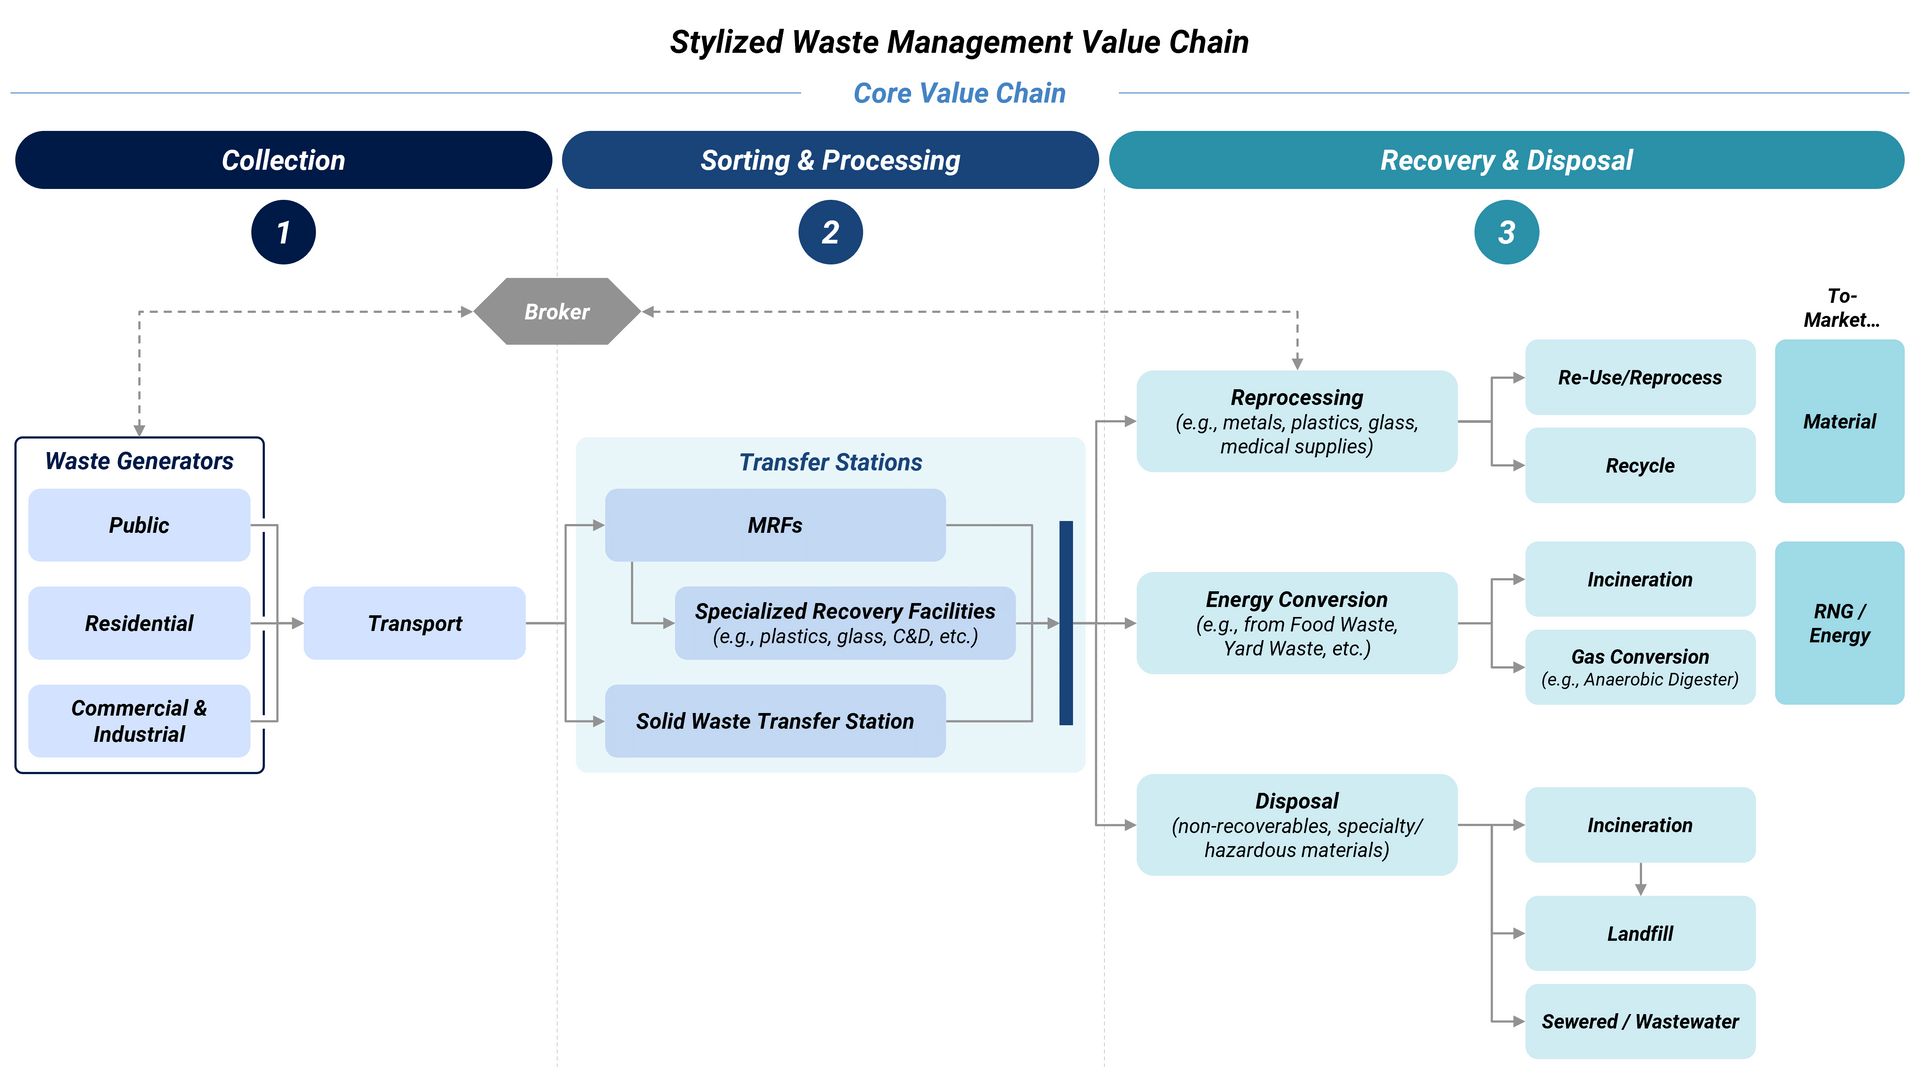 A visualization of the waste management value chain, covering collection, sorting & processing, and recovery & disposal. Each segment lists various equipment, consumables, and services under each.